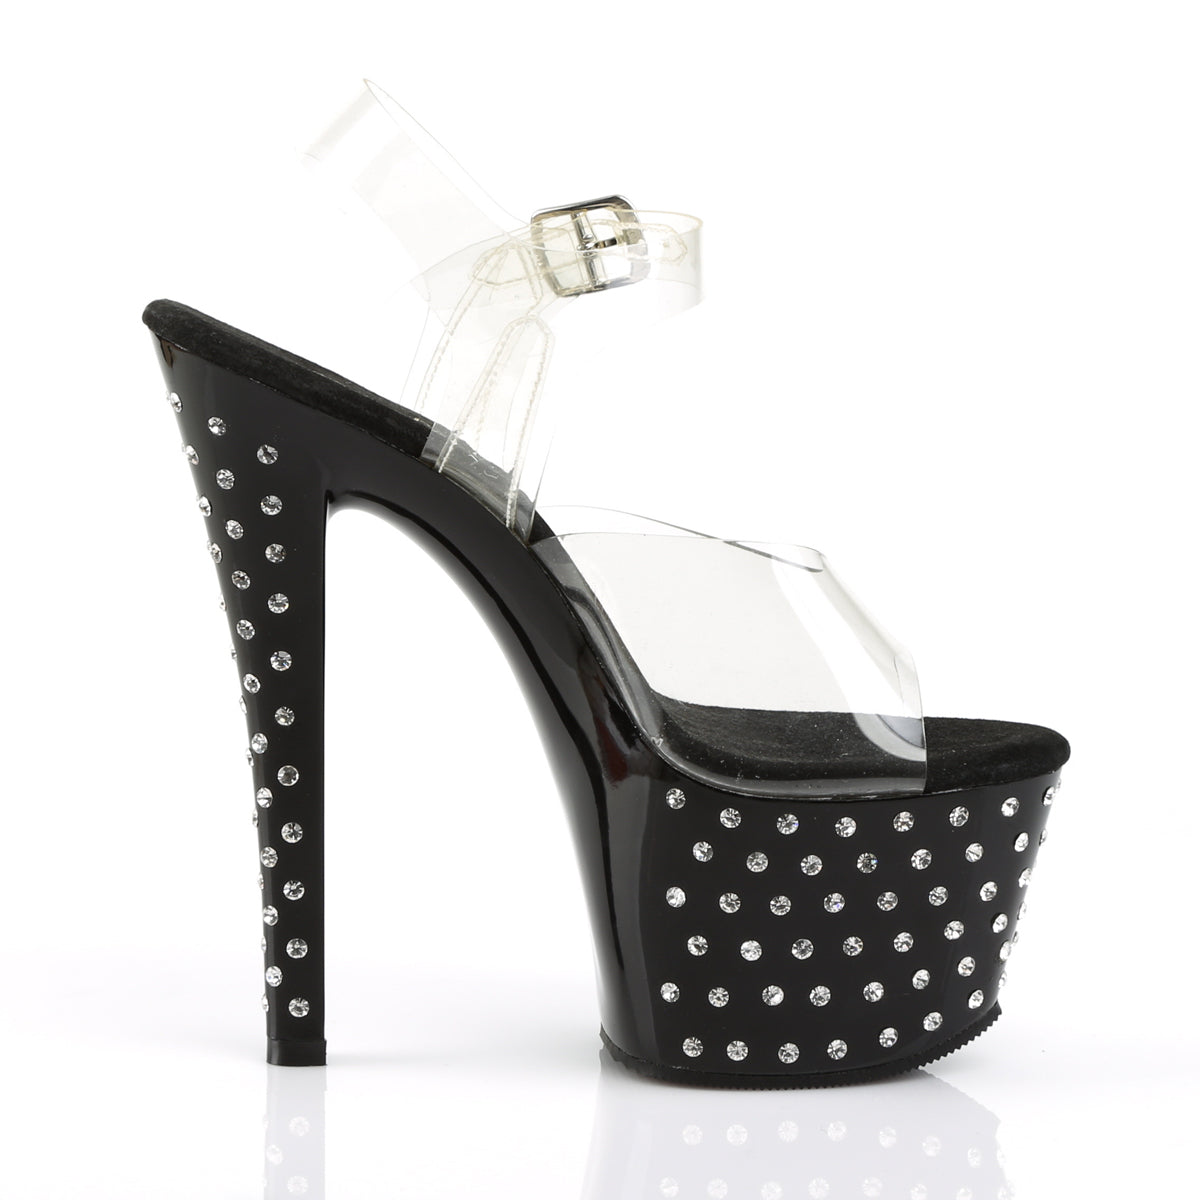 STARDUST-708 7" Heel Clear and Black Pole Dancing Platforms-Pleaser- Sexy Shoes Fetish Heels